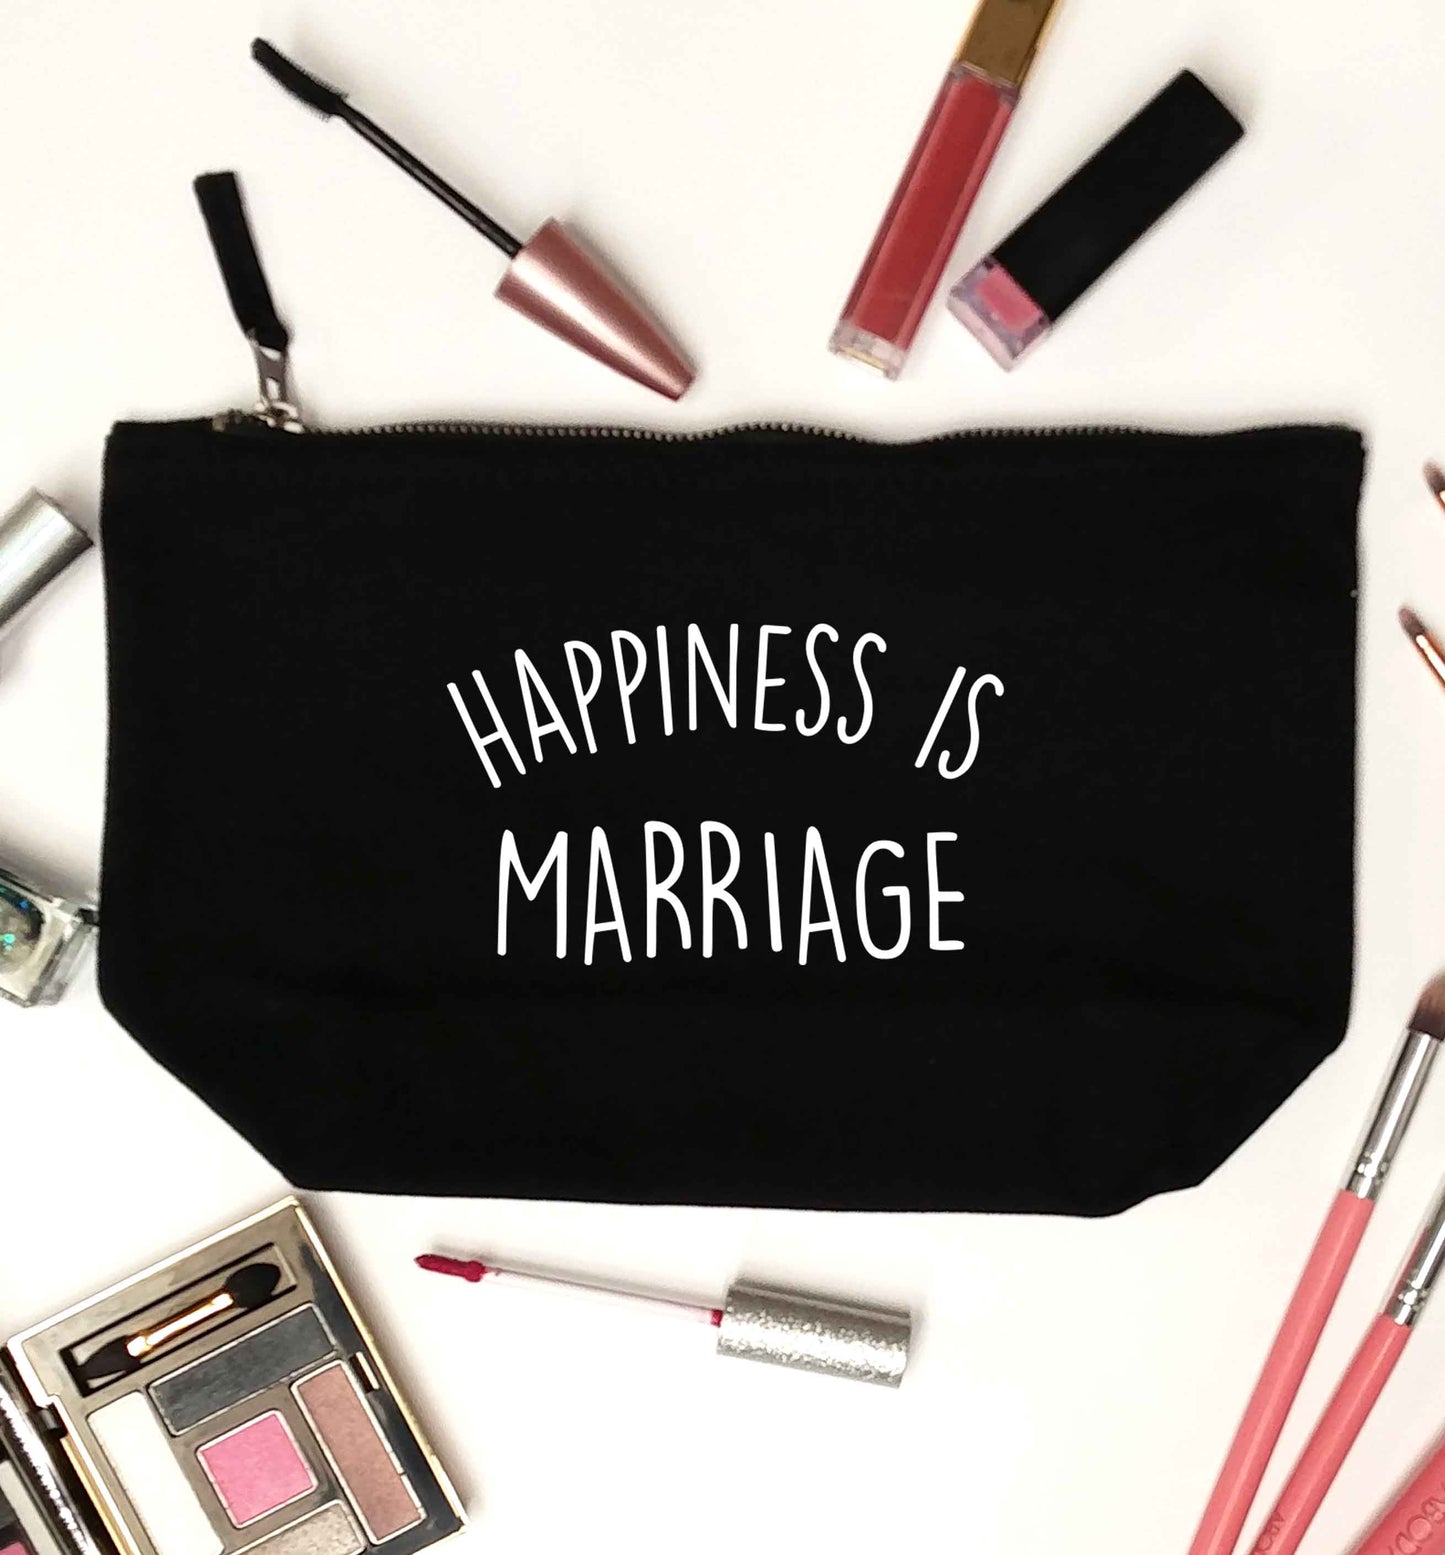 Happiness is marriage black makeup bag